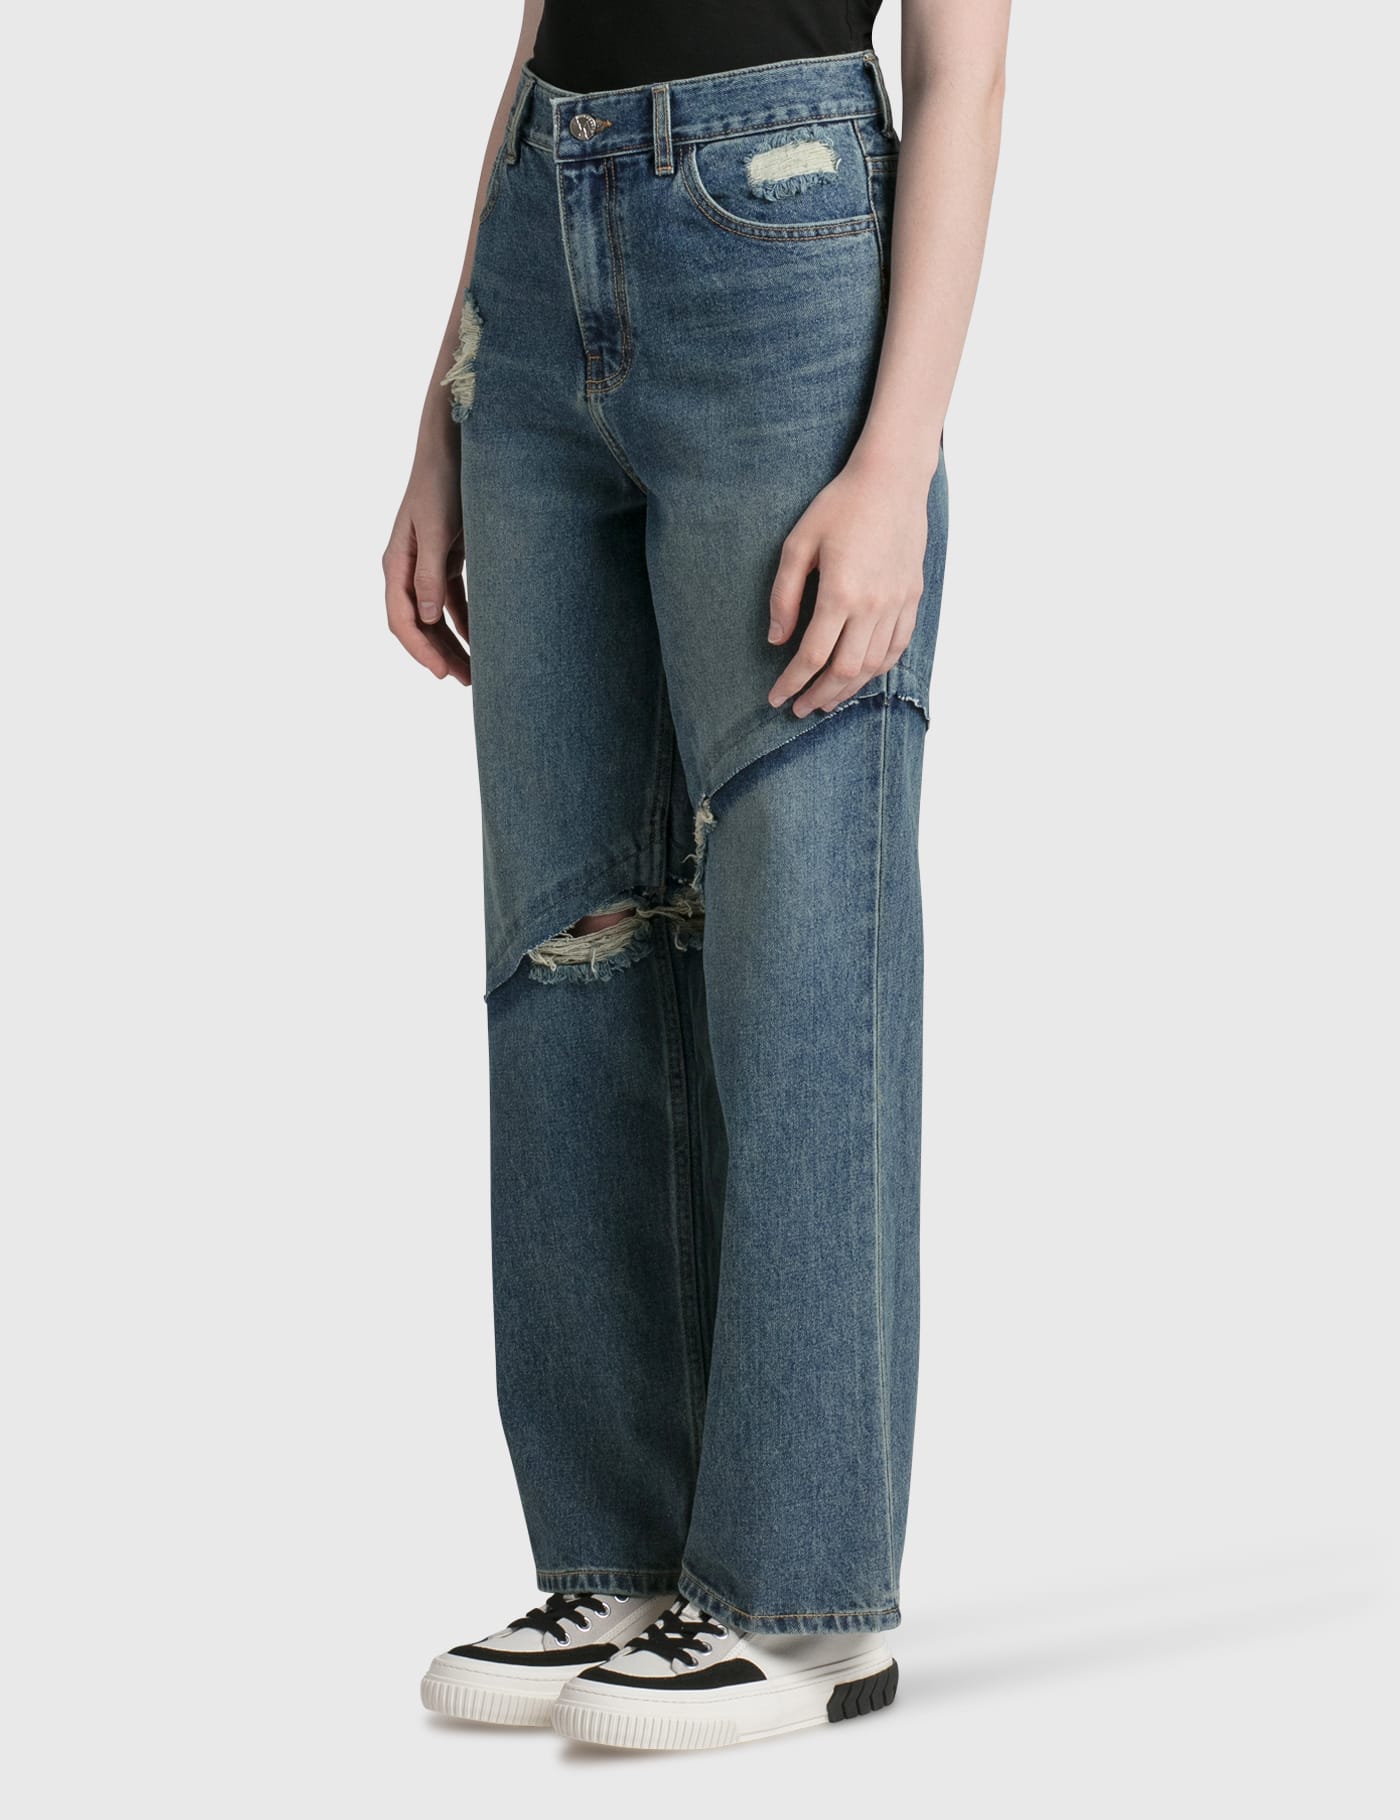 Ader Error - Stami Jeans | HBX - Globally Curated Fashion and Lifestyle by  Hypebeast